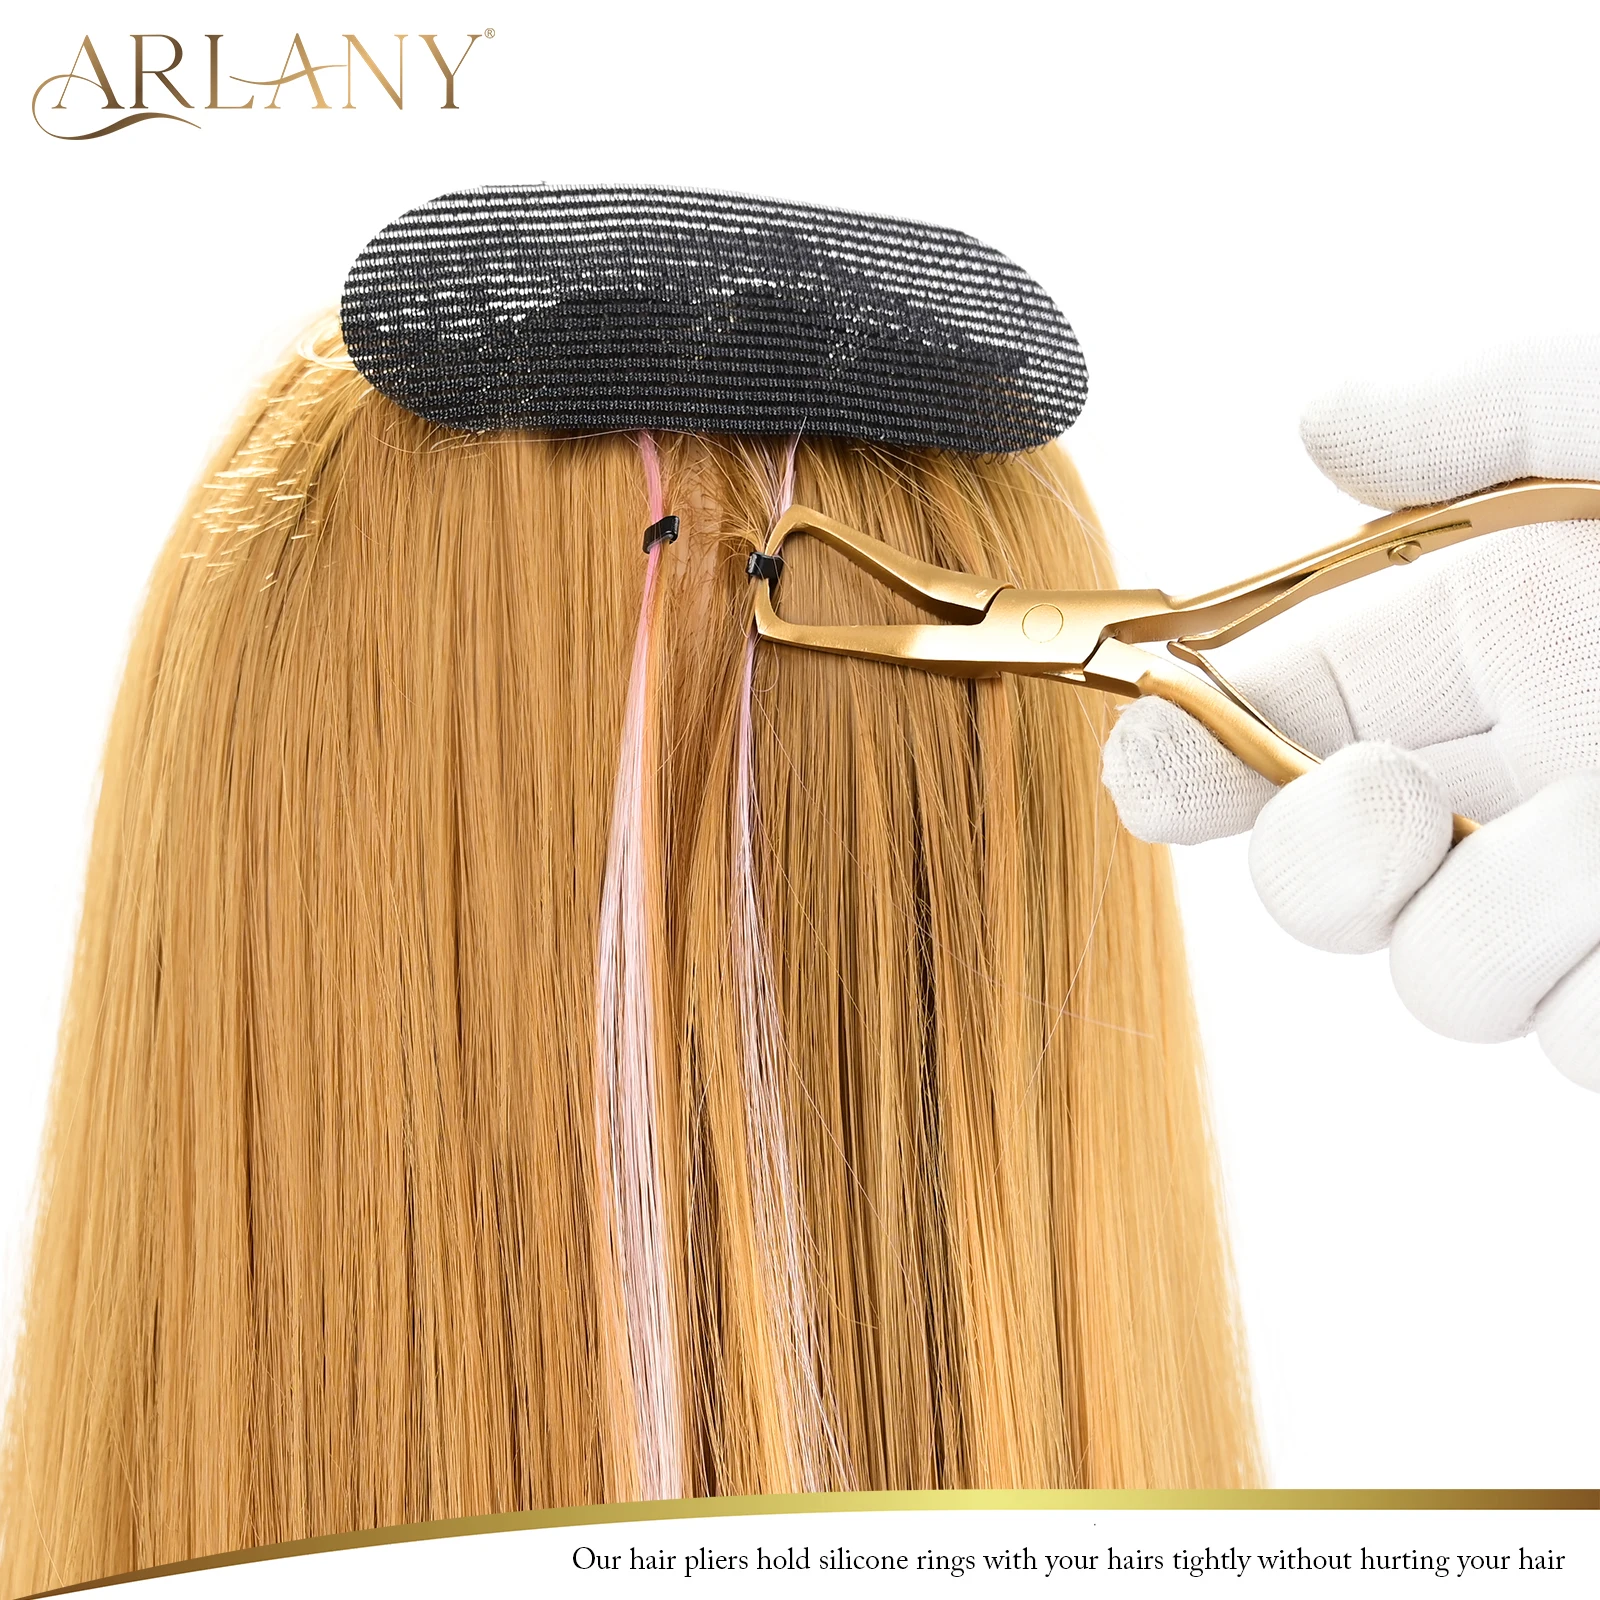 ARLANY Tape in Hair Extension Tool kit Stainless Steel Pliers